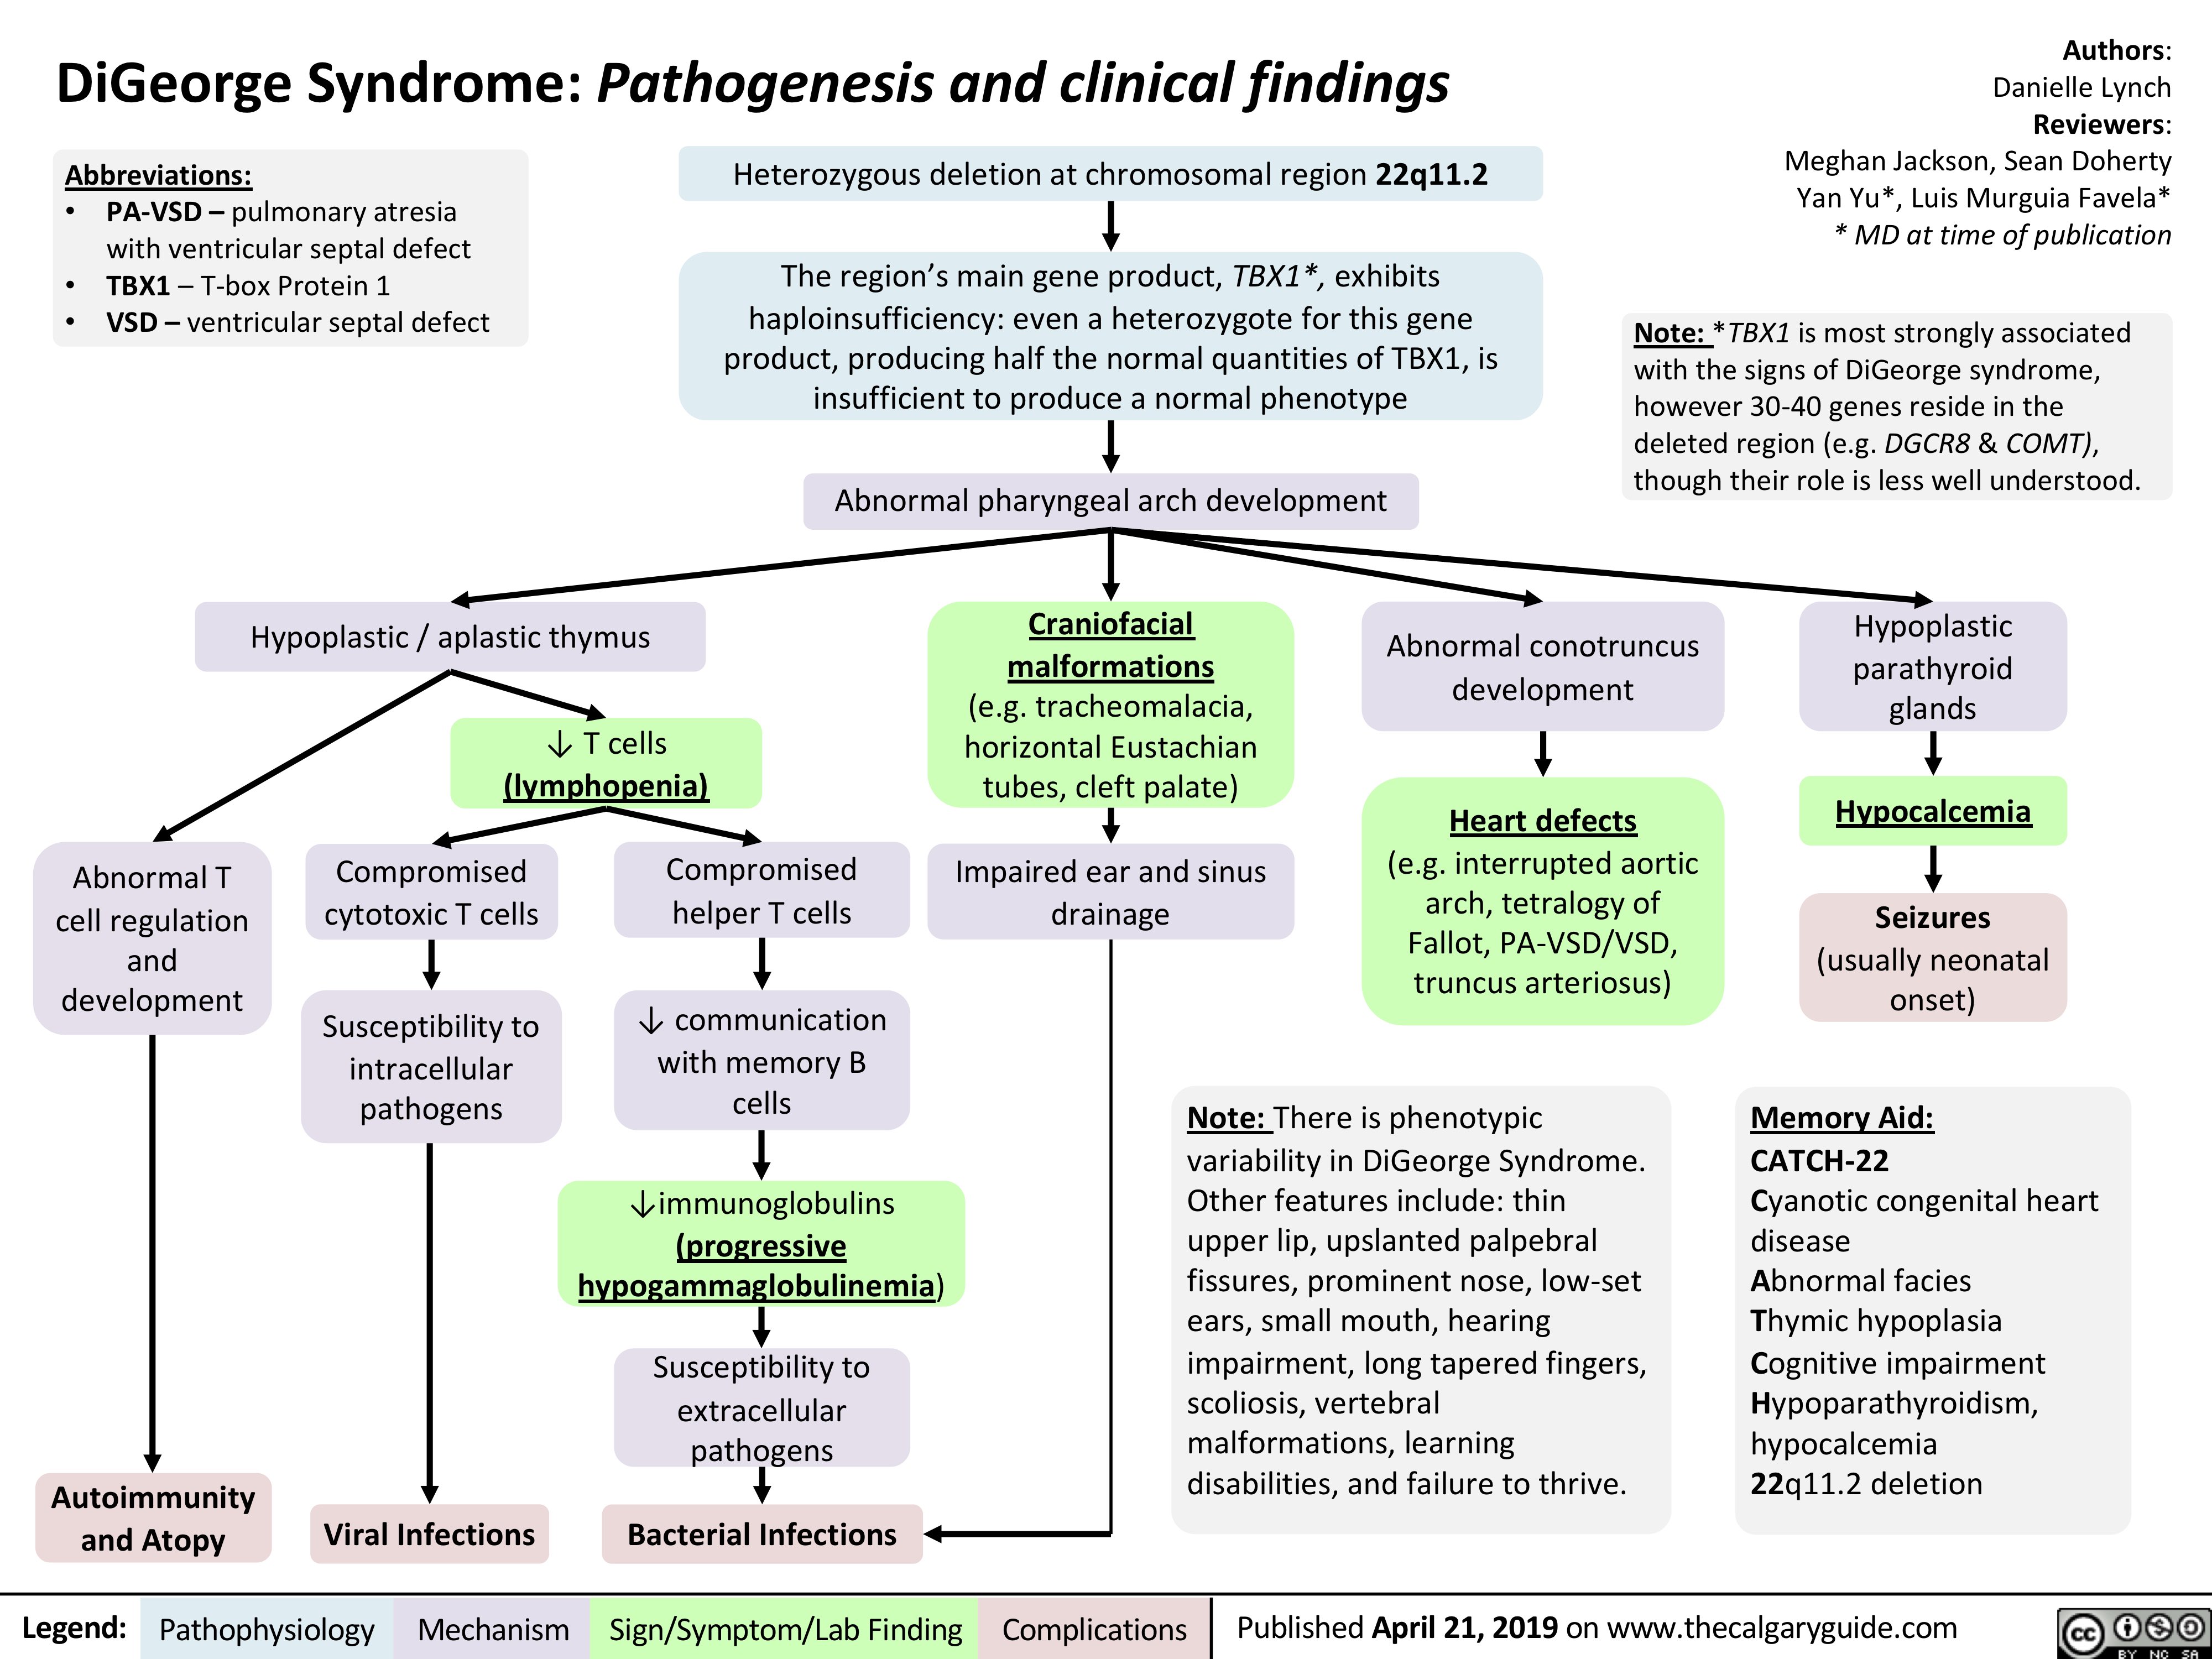 DiGeorge Syndrome: Pathogenesis and clinical findings
Authors: Danielle Lynch Reviewers: Meghan Jackson, Sean Doherty Yan Yu*, Luis Murguia Favela* * MD at time of publication
Note: *TBX1 is most strongly associated with the signs of DiGeorge syndrome, however 30-40 genes reside in the deleted region (e.g. DGCR8 & COMT), though their role is less well understood.
  Abbreviations:
• PA-VSD – pulmonary atresia
with ventricular septal defect
• TBX1 – T-box Protein 1
• VSD – ventricular septal defect
Heterozygous deletion at chromosomal region 22q11.2
The region’s main gene product, TBX1*, exhibits haploinsufficiency: even a heterozygote for this gene product, producing half the normal quantities of TBX1, is insufficient to produce a normal phenotype
Abnormal pharyngeal arch development
              Hypoplastic / aplastic thymus ↓ T cells
(lymphopenia)
Craniofacial malformations (e.g. tracheomalacia, horizontal Eustachian tubes, cleft palate)
Impaired ear and sinus drainage
Abnormal conotruncus development
Heart defects
(e.g. interrupted aortic arch, tetralogy of Fallot, PA-VSD/VSD, truncus arteriosus)
Hypoplastic parathyroid glands
Hypocalcemia Seizures
(usually neonatal onset)
Memory Aid:
CATCH-22
Cyanotic congenital heart disease
Abnormal facies
Thymic hypoplasia Cognitive impairment Hypoparathyroidism, hypocalcemia
22q11.2 deletion
               Abnormal T cell regulation
and development
Compromised cytotoxic T cells
Susceptibility to intracellular pathogens
Compromised helper T cells
↓ communication with memory B cells
↓immunoglobulins
(progressive hypogammaglobulinemia)
Susceptibility to extracellular pathogens
                    Autoimmunity and Atopy
Note: There is phenotypic variability in DiGeorge Syndrome. Other features include: thin upper lip, upslanted palpebral fissures, prominent nose, low-set ears, small mouth, hearing impairment, long tapered fingers, scoliosis, vertebral malformations, learning disabilities, and failure to thrive.
  Viral Infections
Bacterial Infections
  Legend:
 Pathophysiology
 Mechanism
Sign/Symptom/Lab Finding
  Complications
Published April 21, 2019 on www.thecalgaryguide.com
   